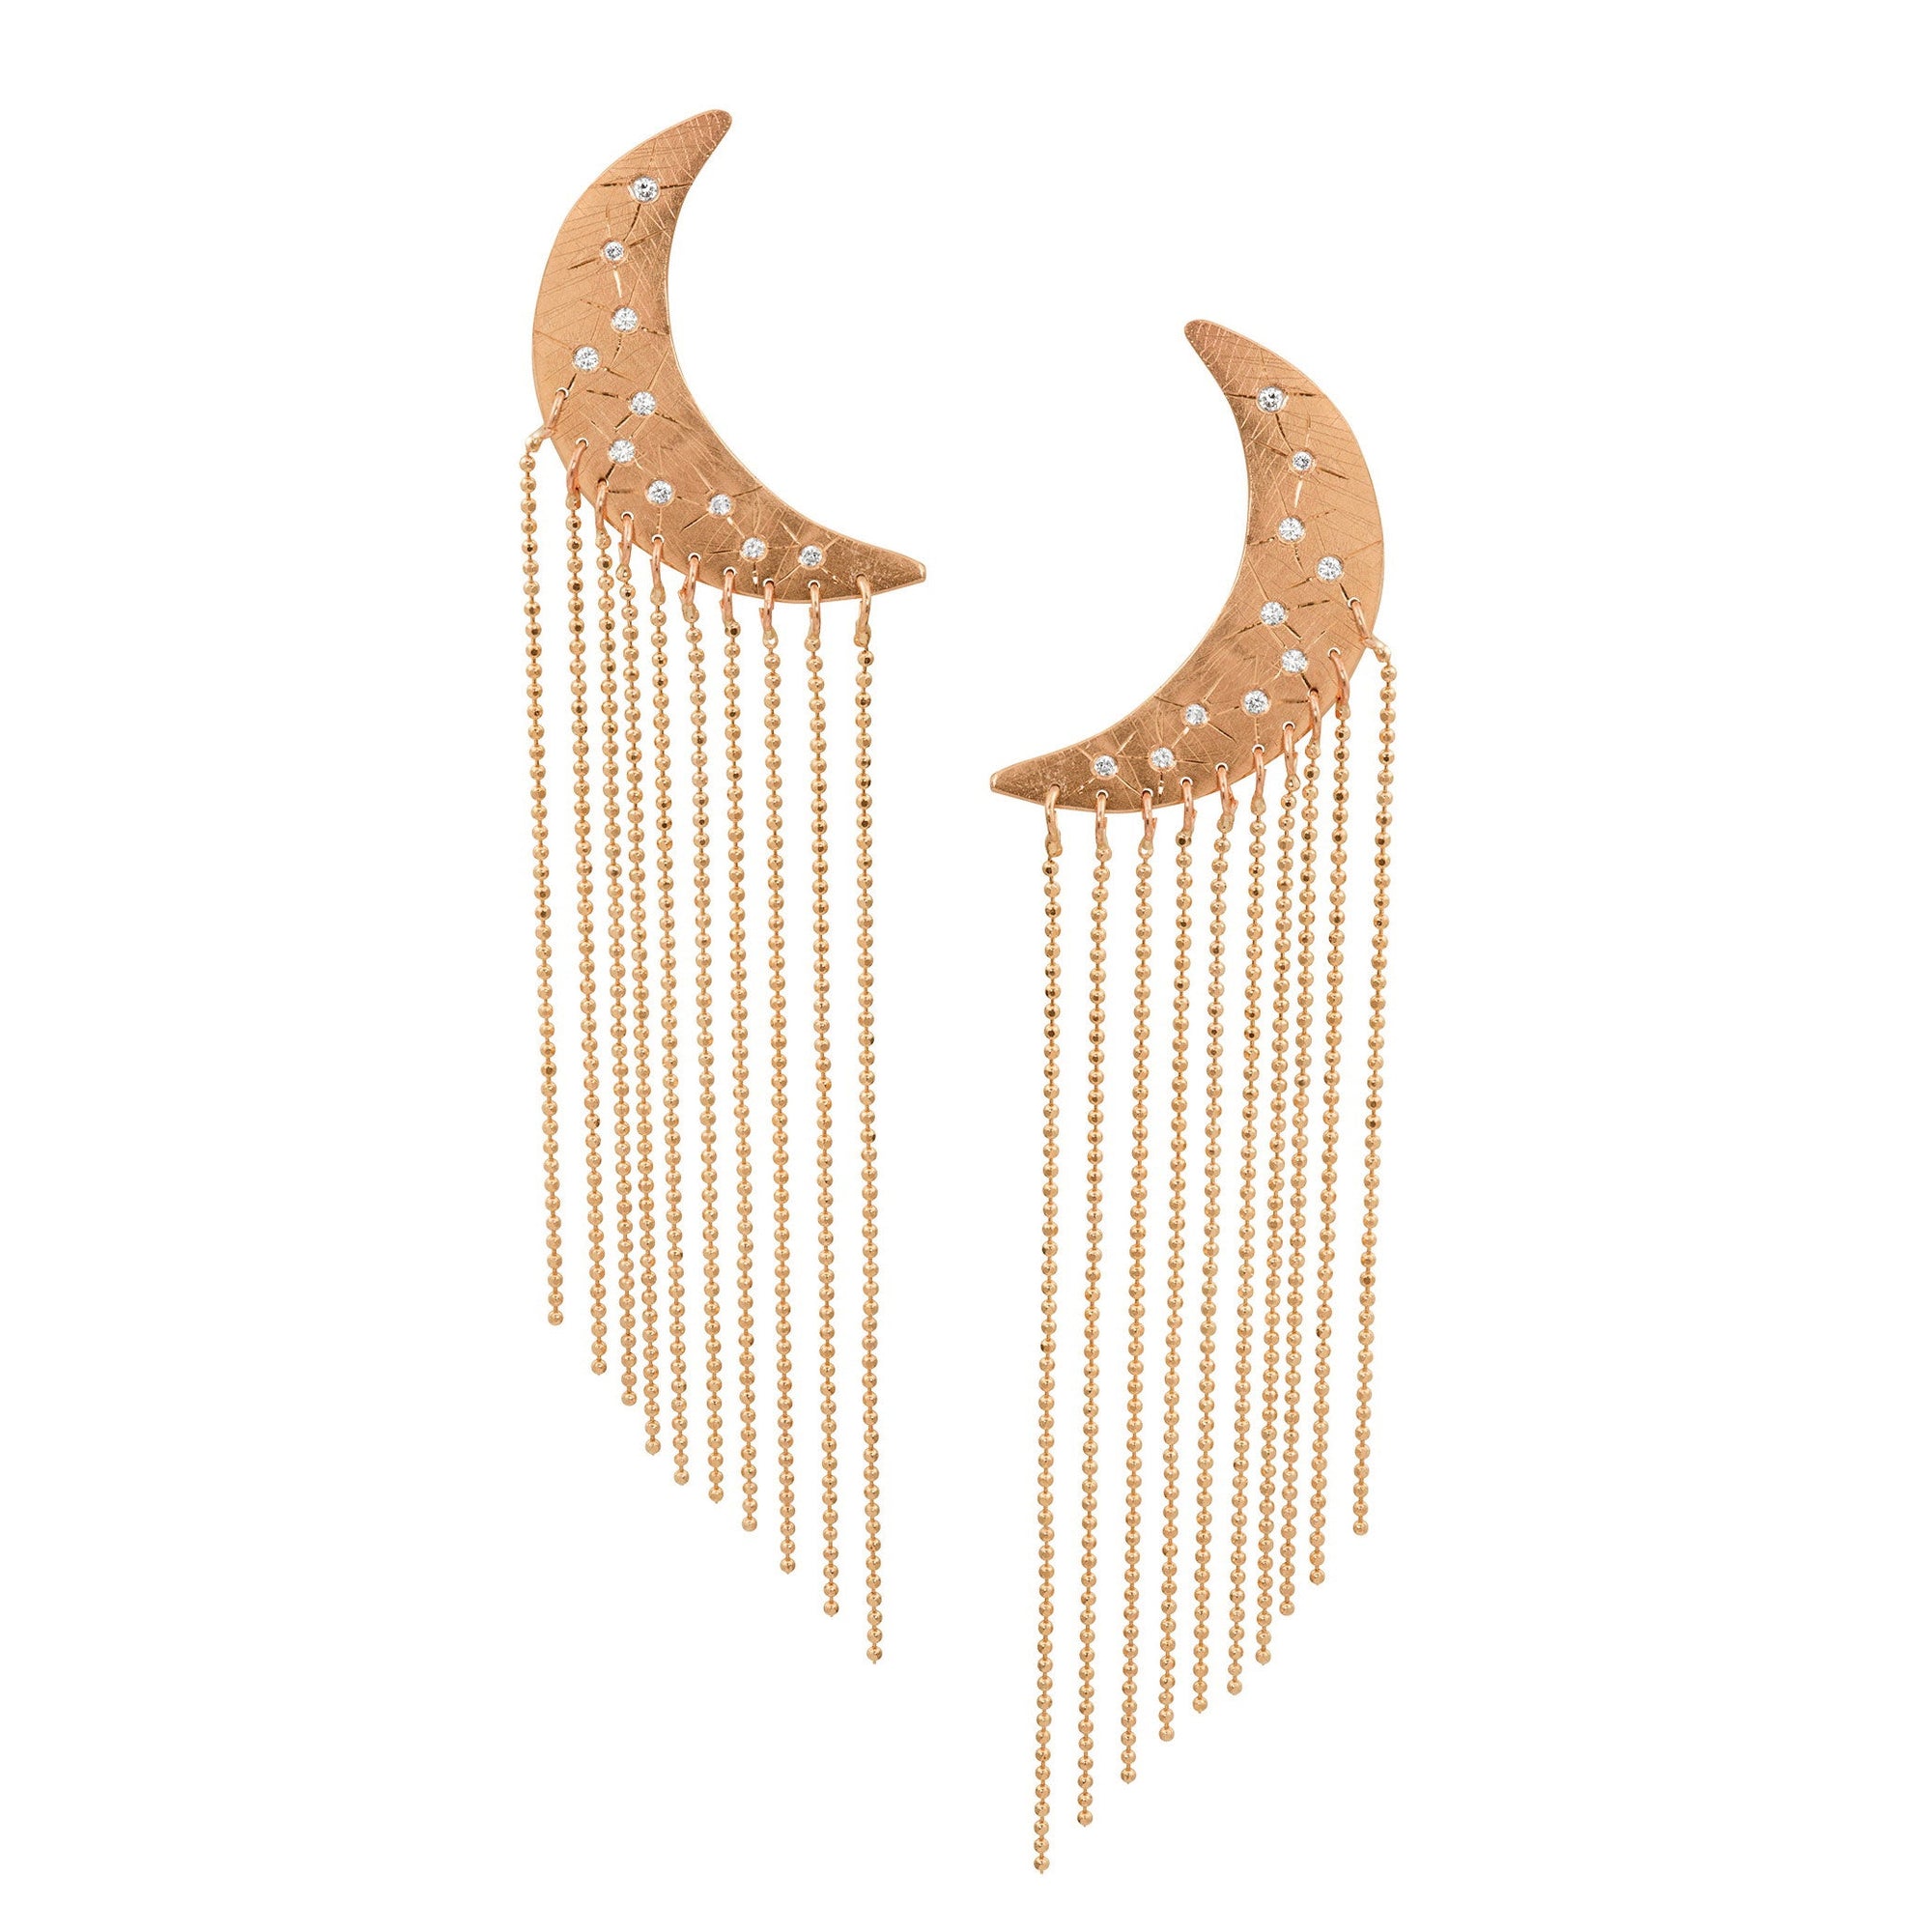 14k rose gold x-large ALDA moon post earrings with chain fringe